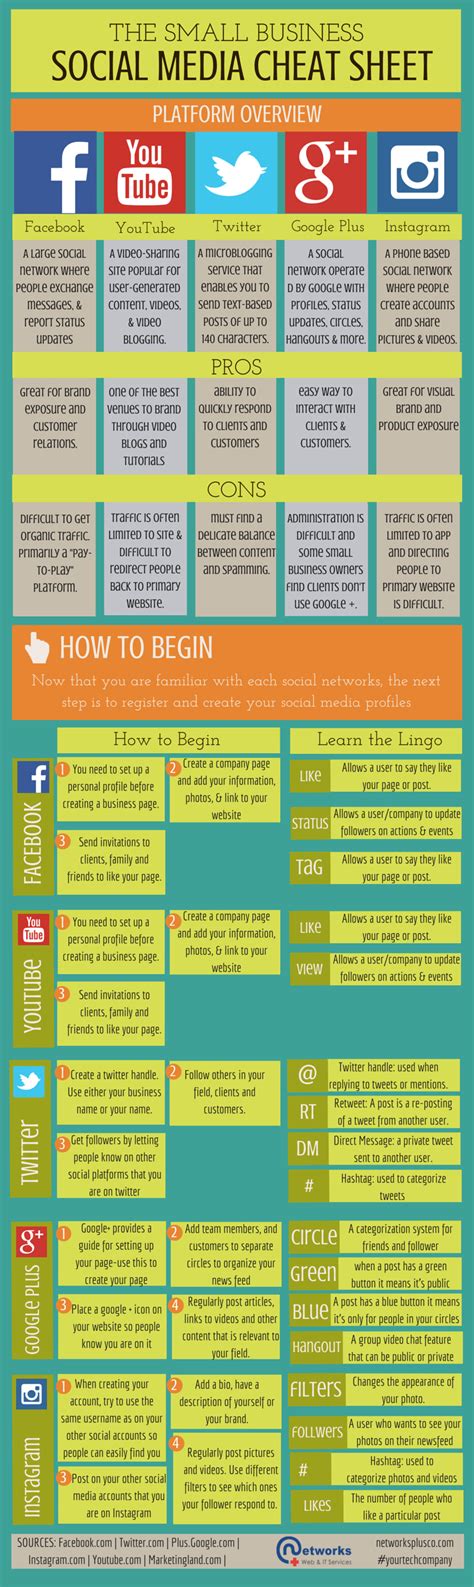 Infographic The Small Business Social Media Cheat Sheet Networks Plus